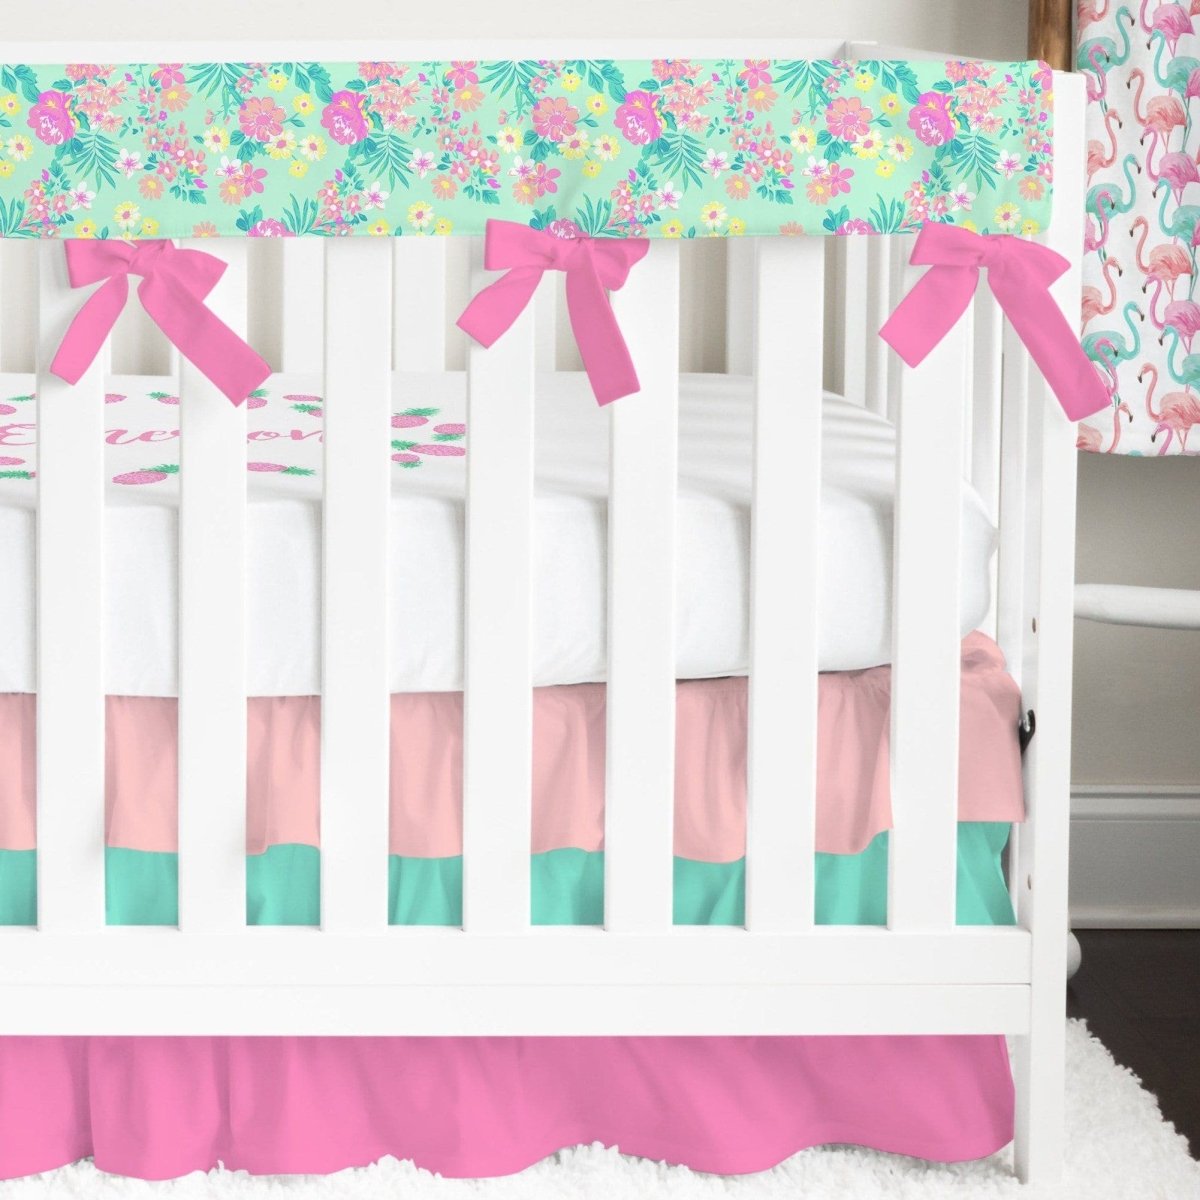 Tropical Paradise Floral Ruffled Crib Bedding - gender_girl, Theme_Floral, Theme_Tropical